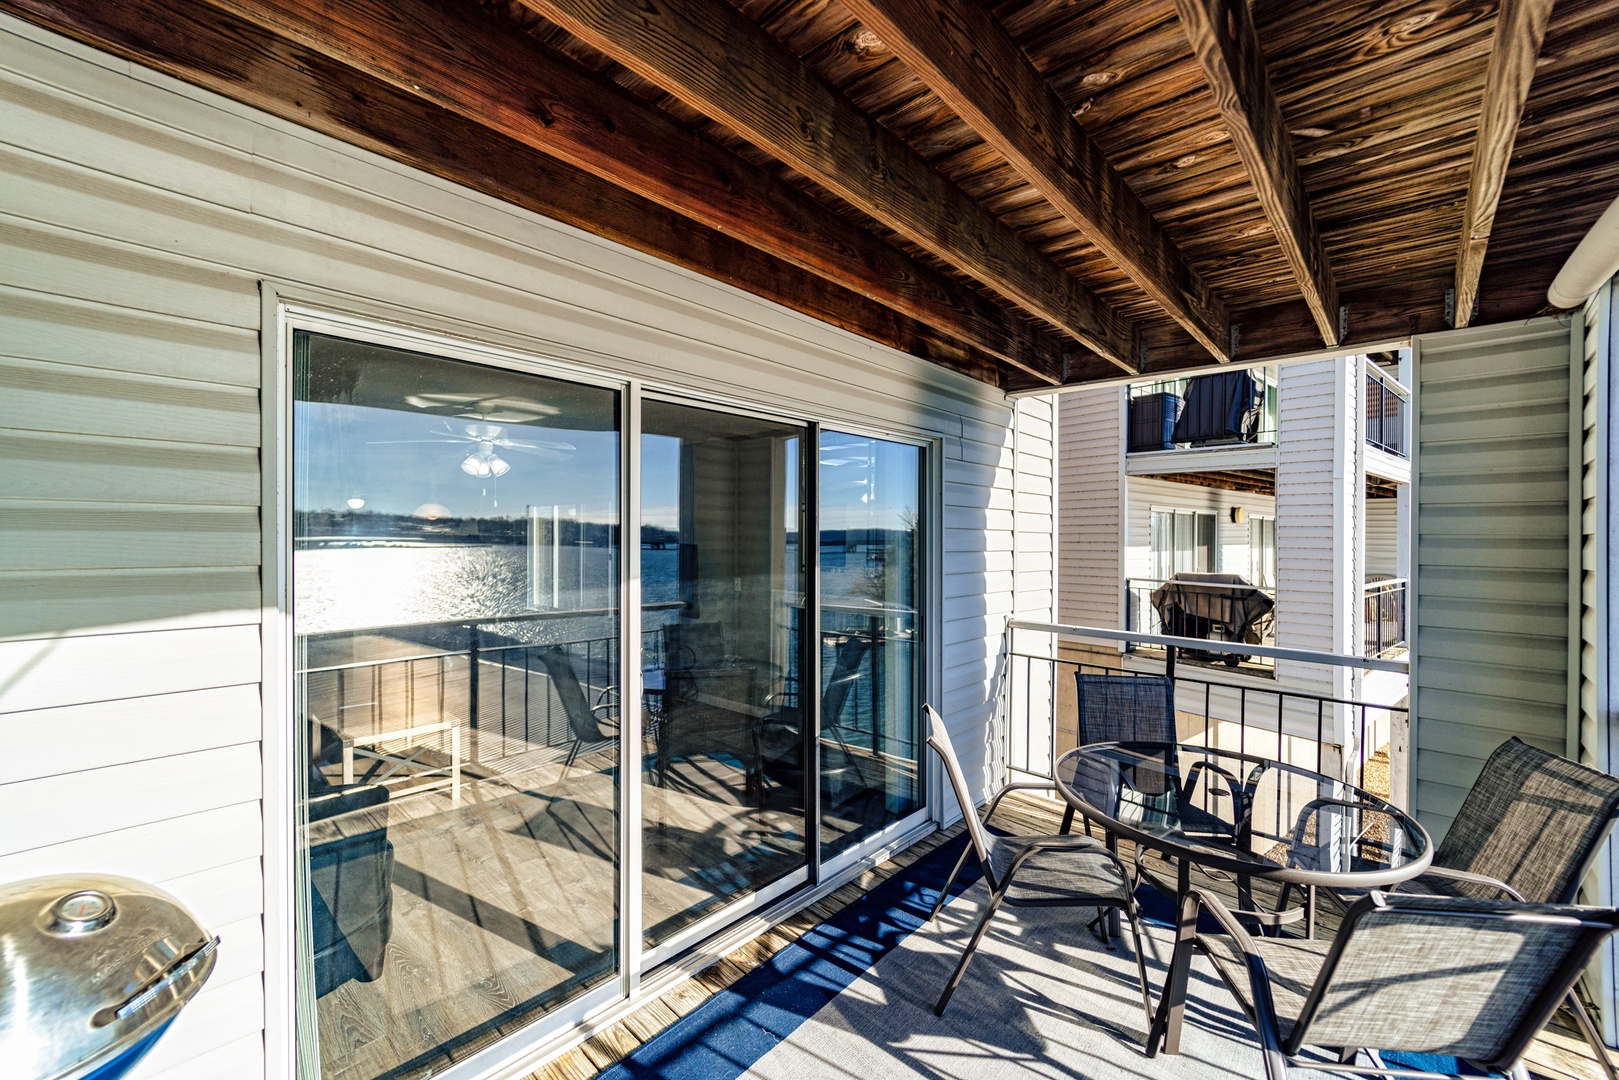 Savor the mesmerizing lake views while nestled in the comfort of the deck